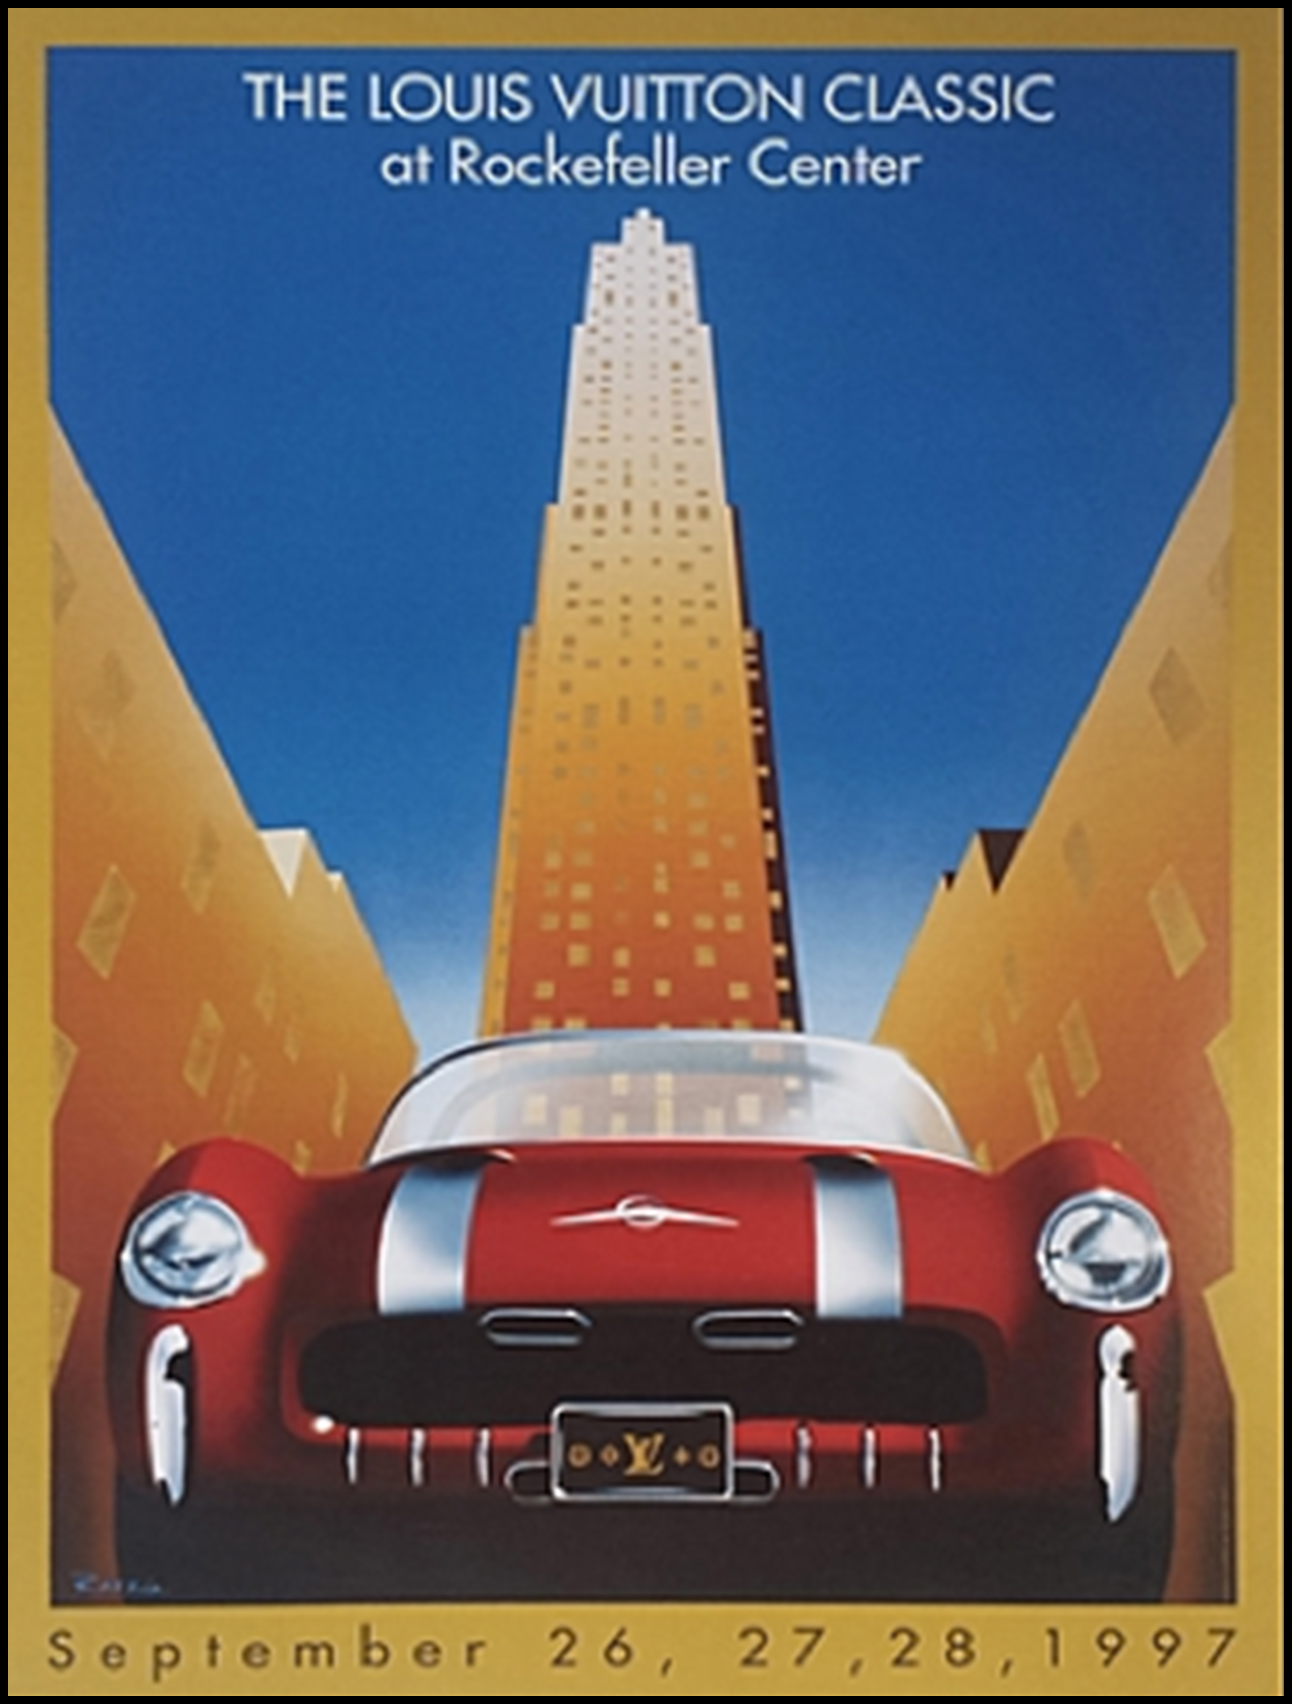 Poster of The Louis Vuitton Classic featuring the 1954 Pontiac Bonneville Special from the Bortz Auto Collection.